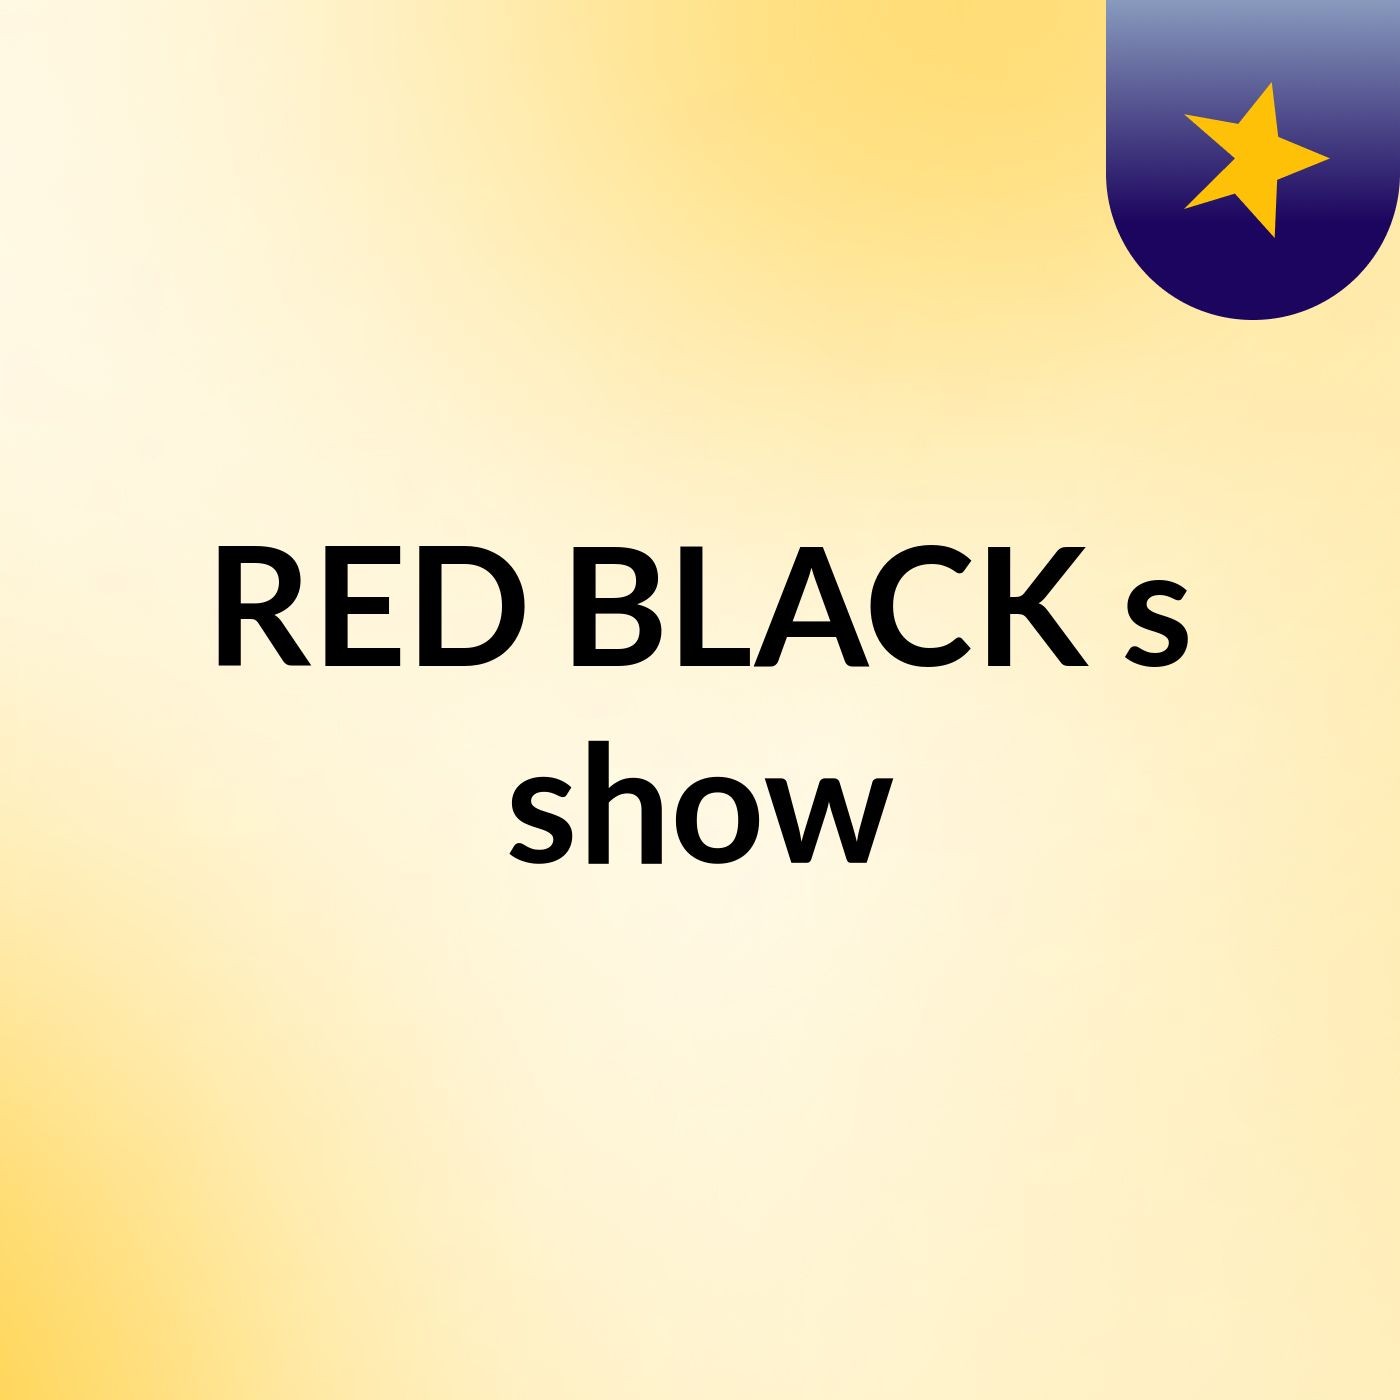 RED BLACK's show